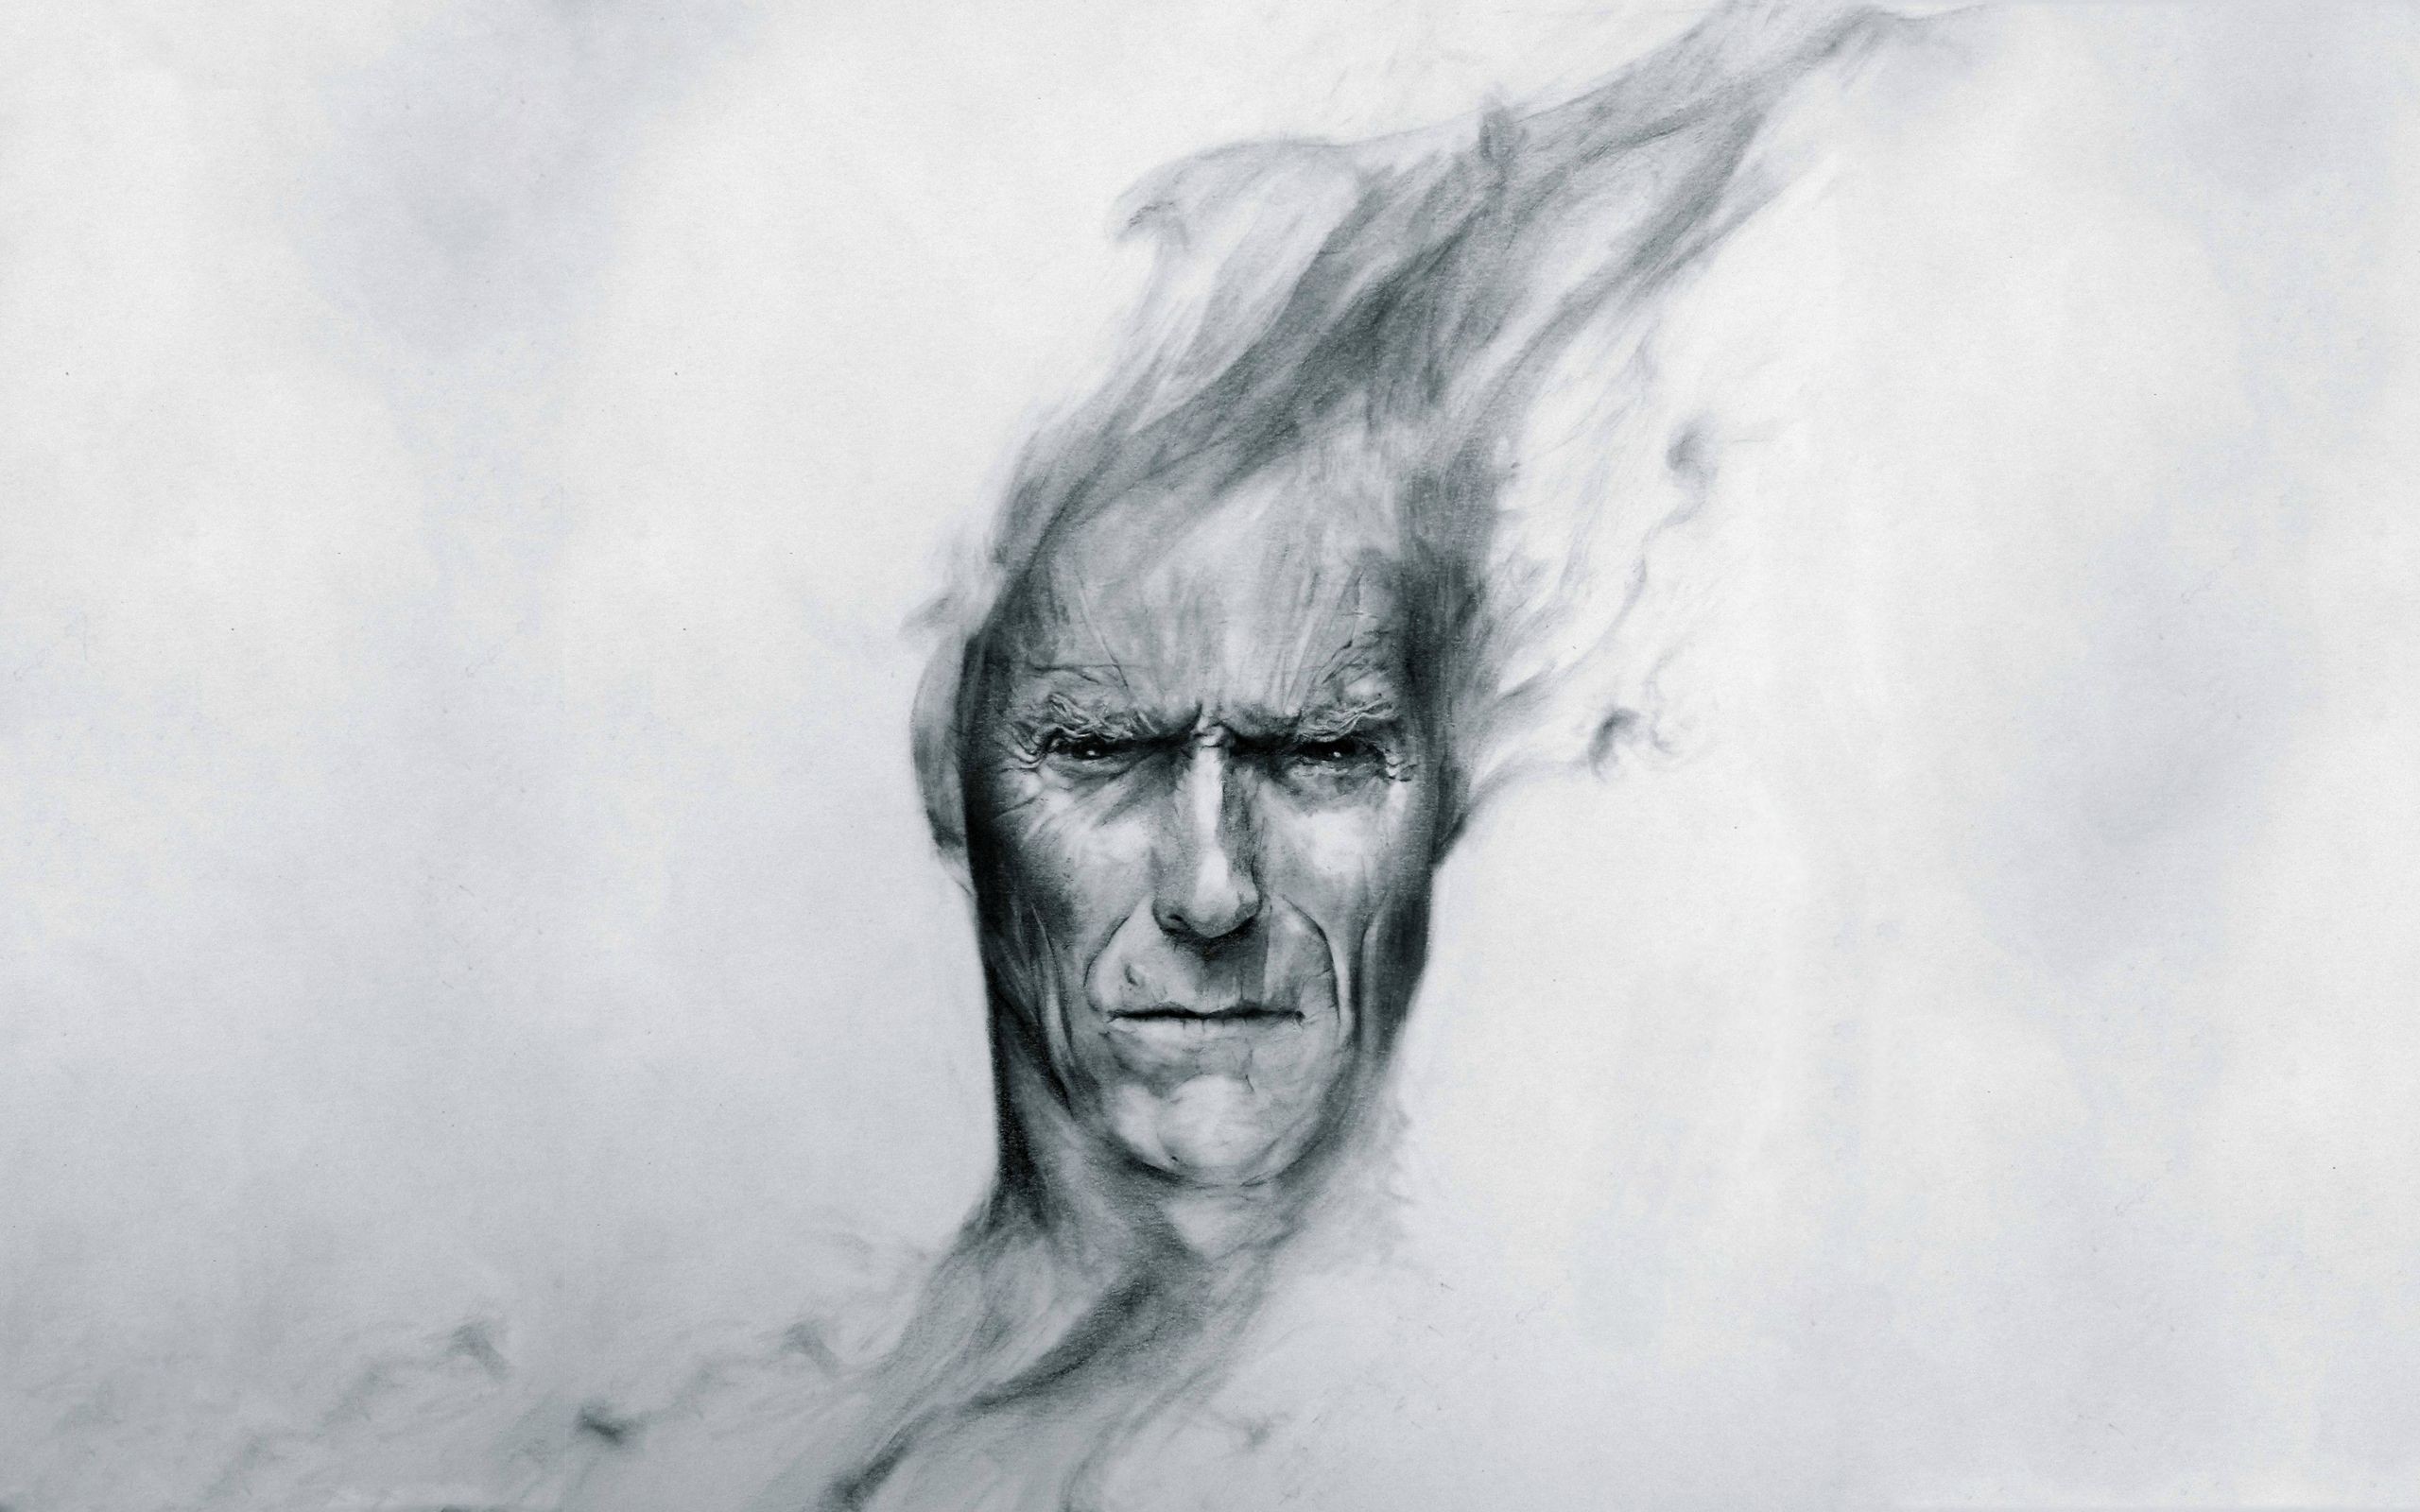 General 2560x1600 drawing Clint Eastwood artwork men actor smoke pencil drawing gray face white white background portrait looking at viewer celebrity dark eyes black eyes angry digital art simple background monochrome